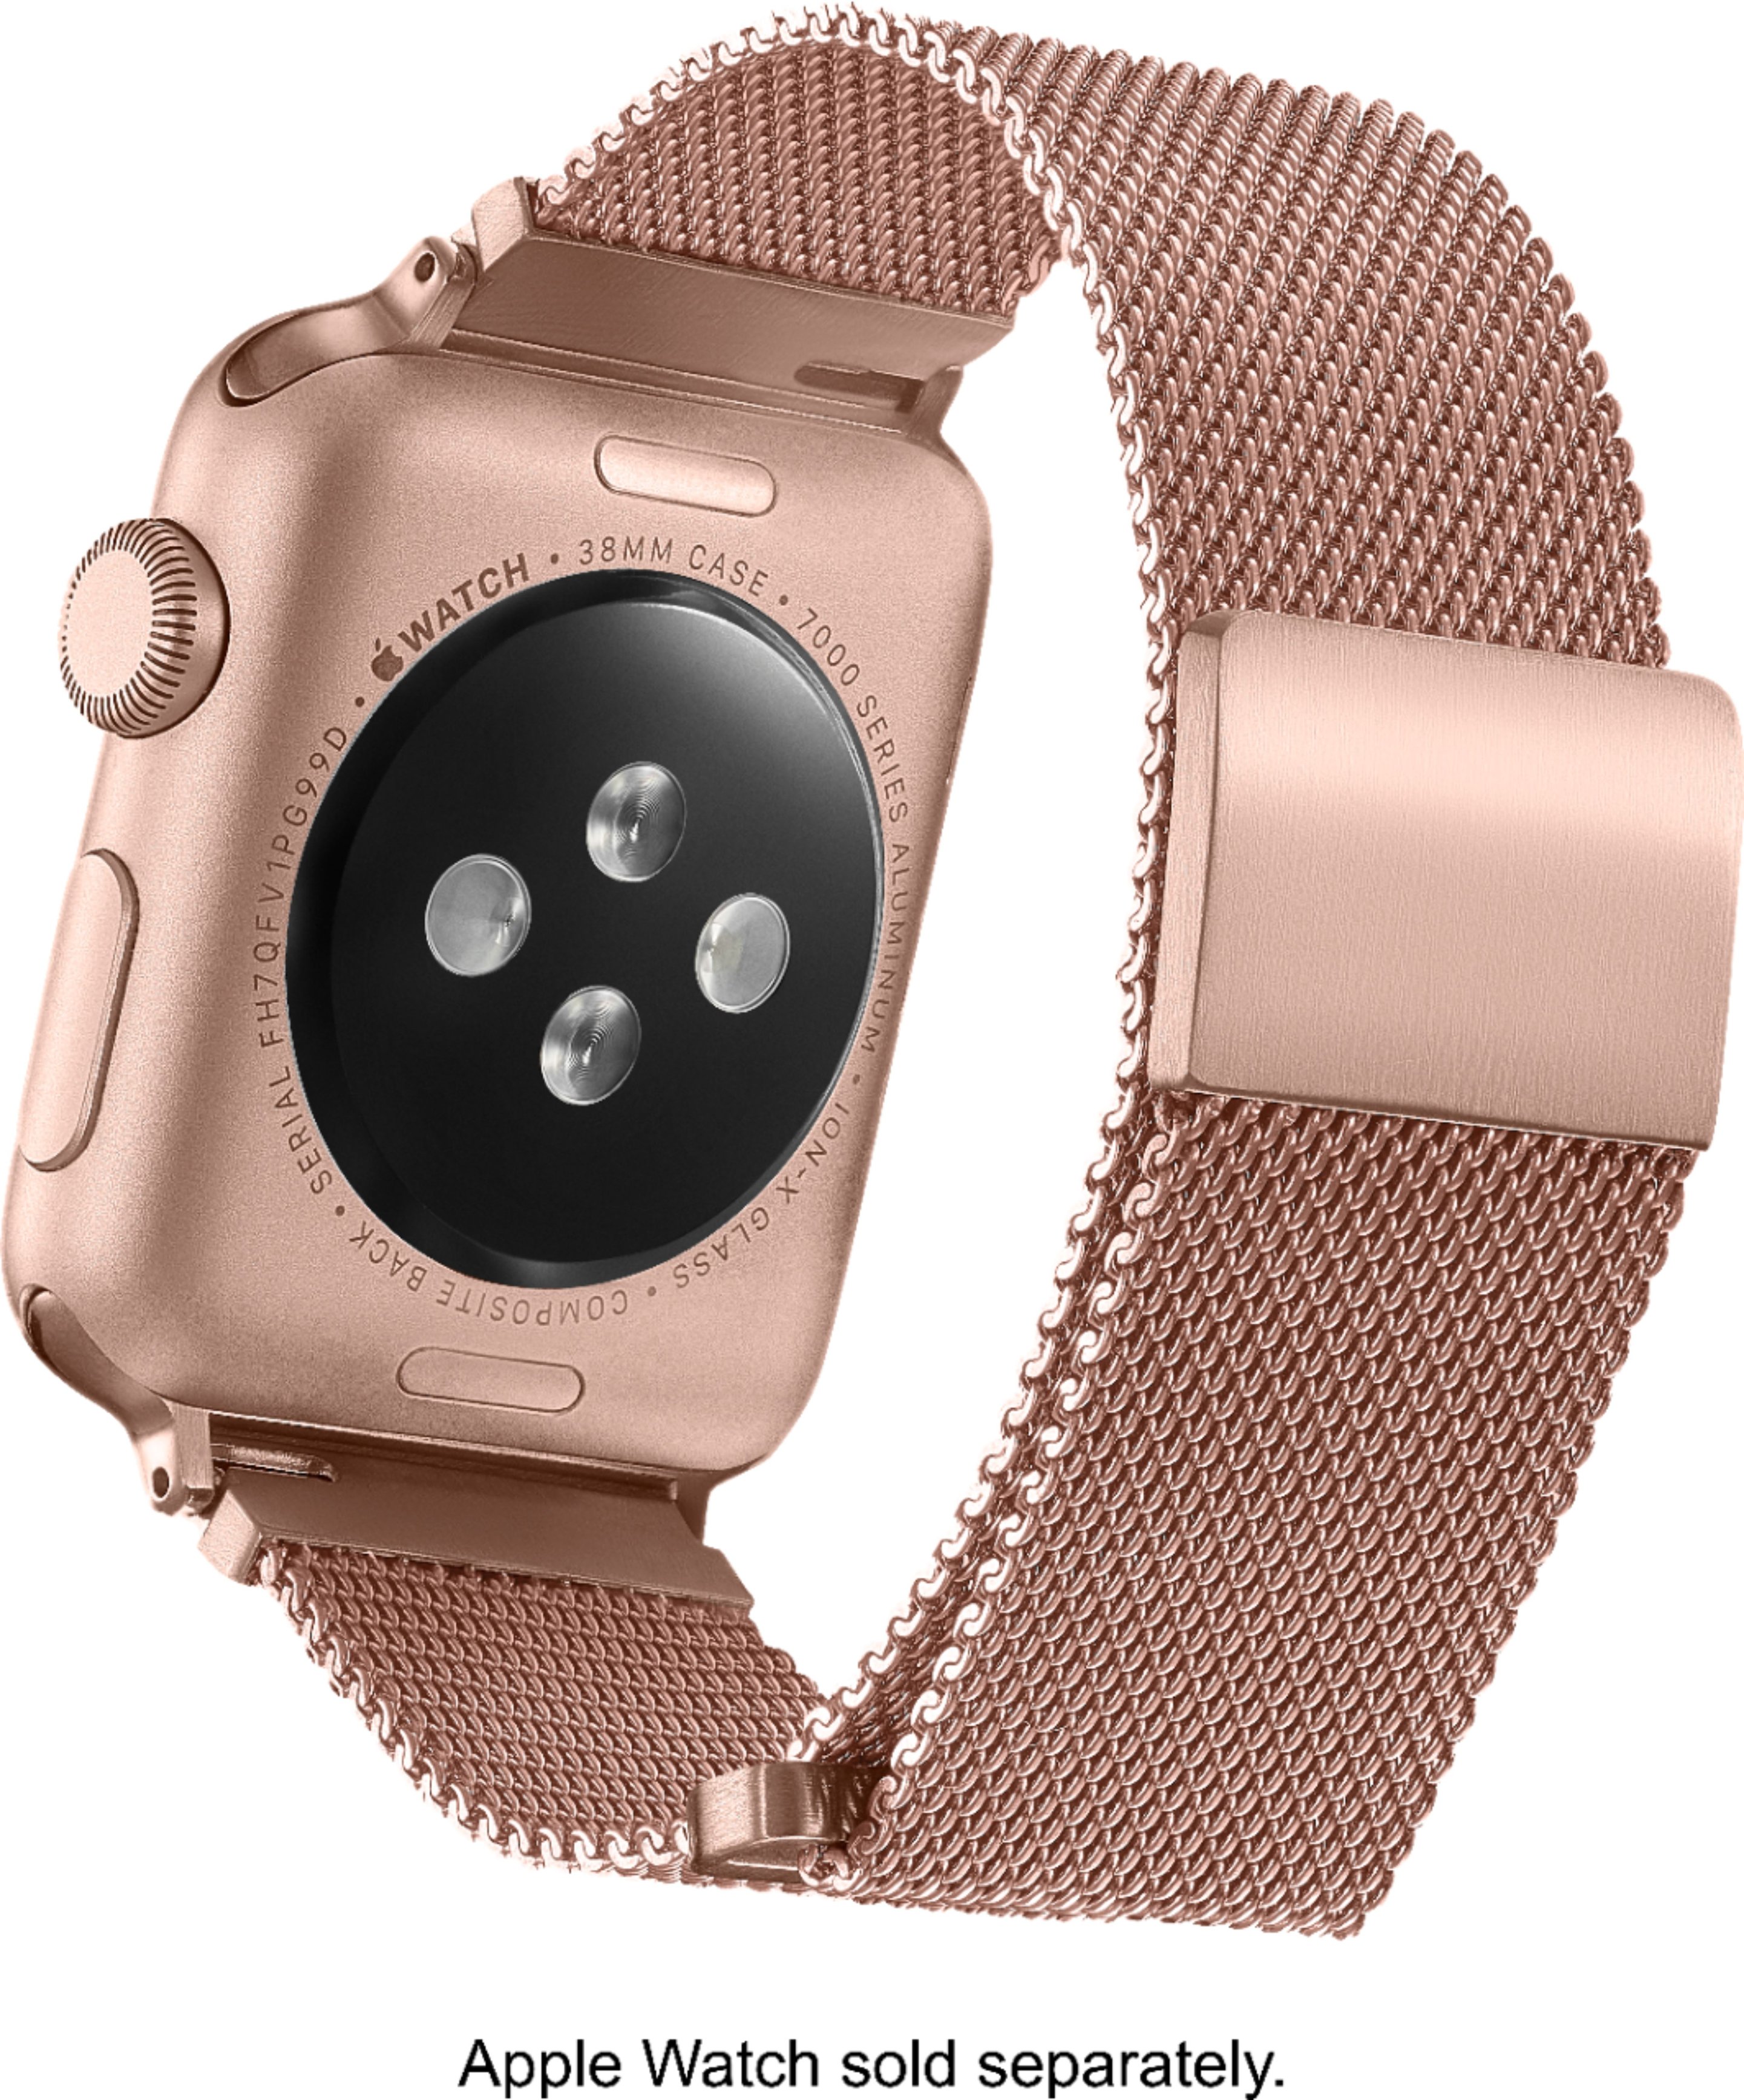 Apple Watch Series 2 Smartwatch 38mm Rose Gold Aluminium Case with